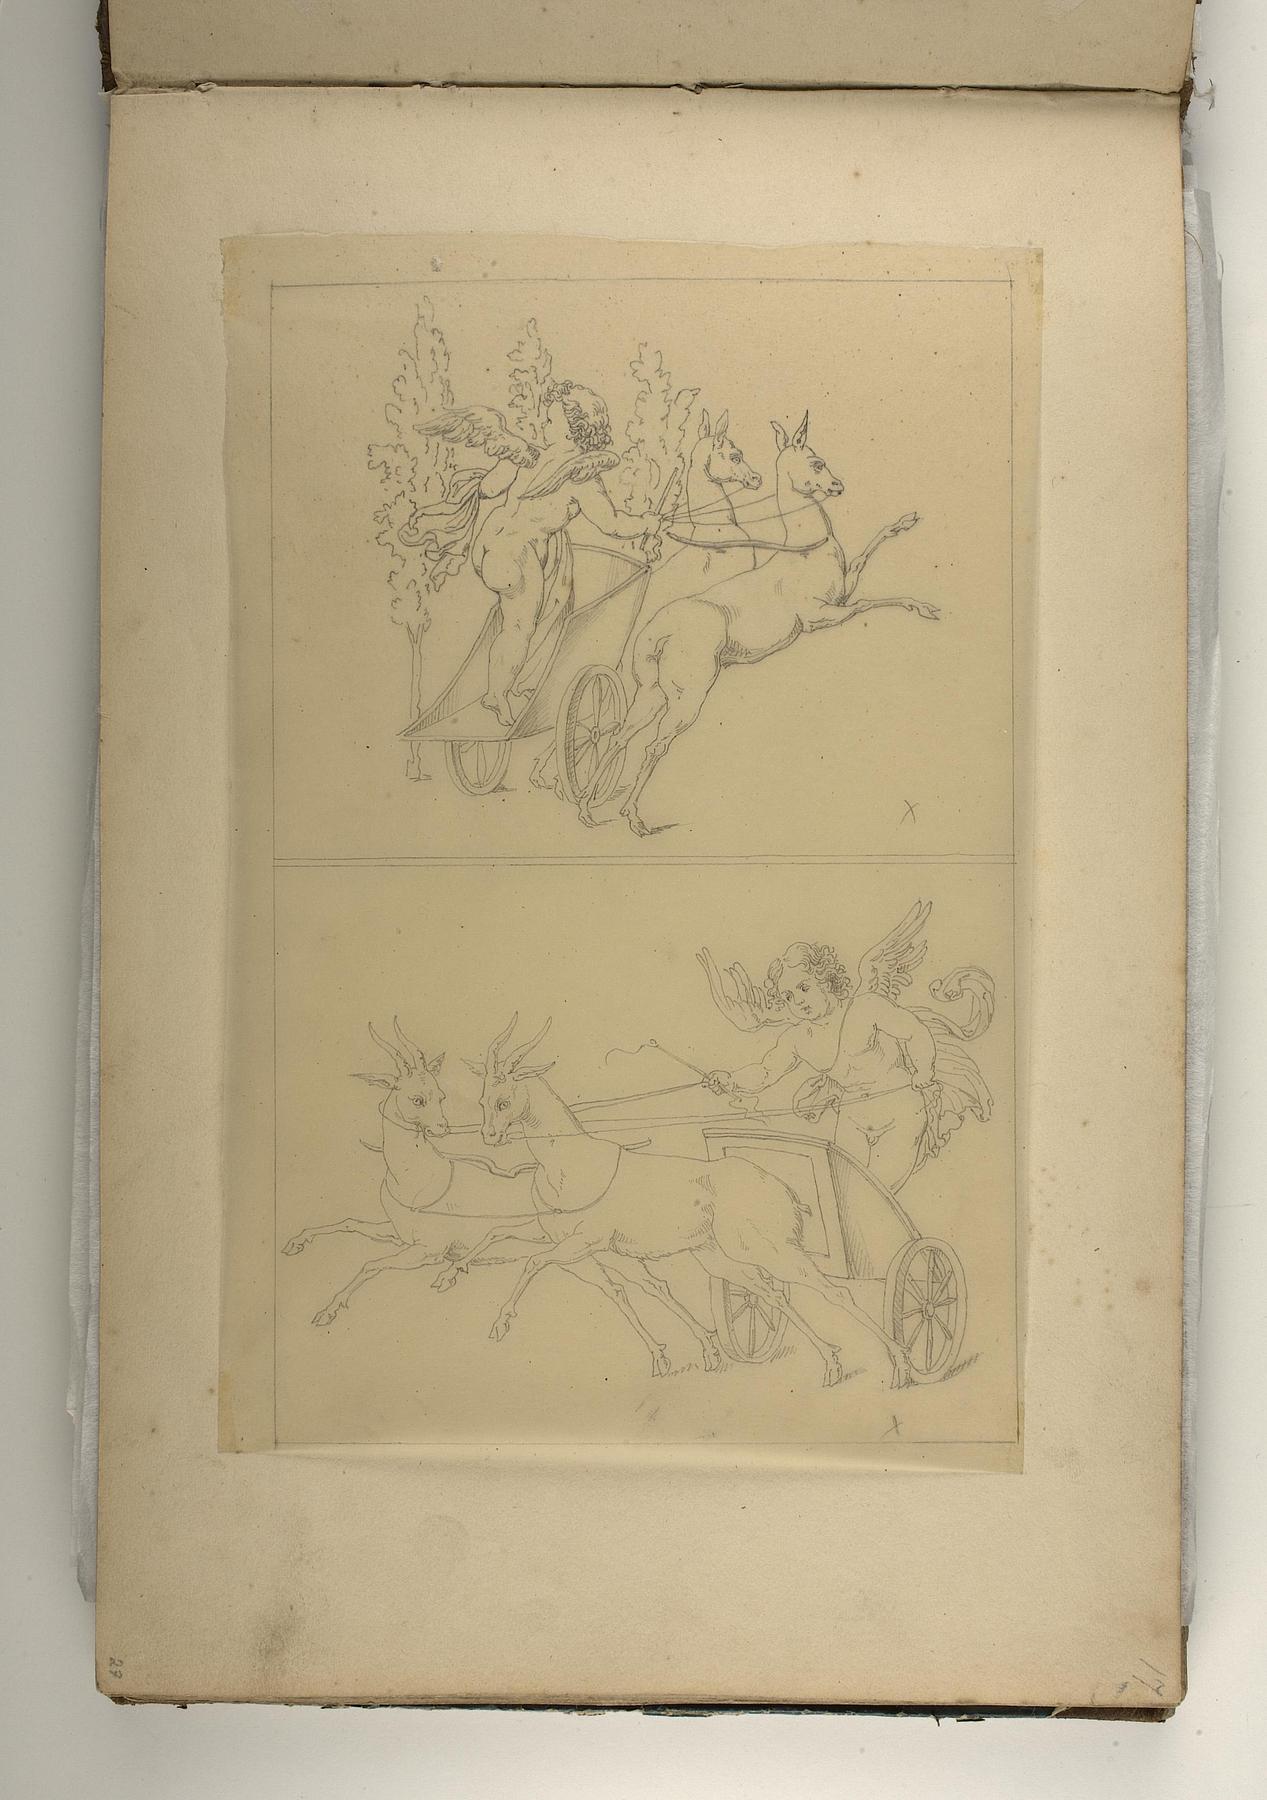 Cupid on a Chariot drawn by two Deers. Cupid on a Chariot drawn by two Goats, D1827,27